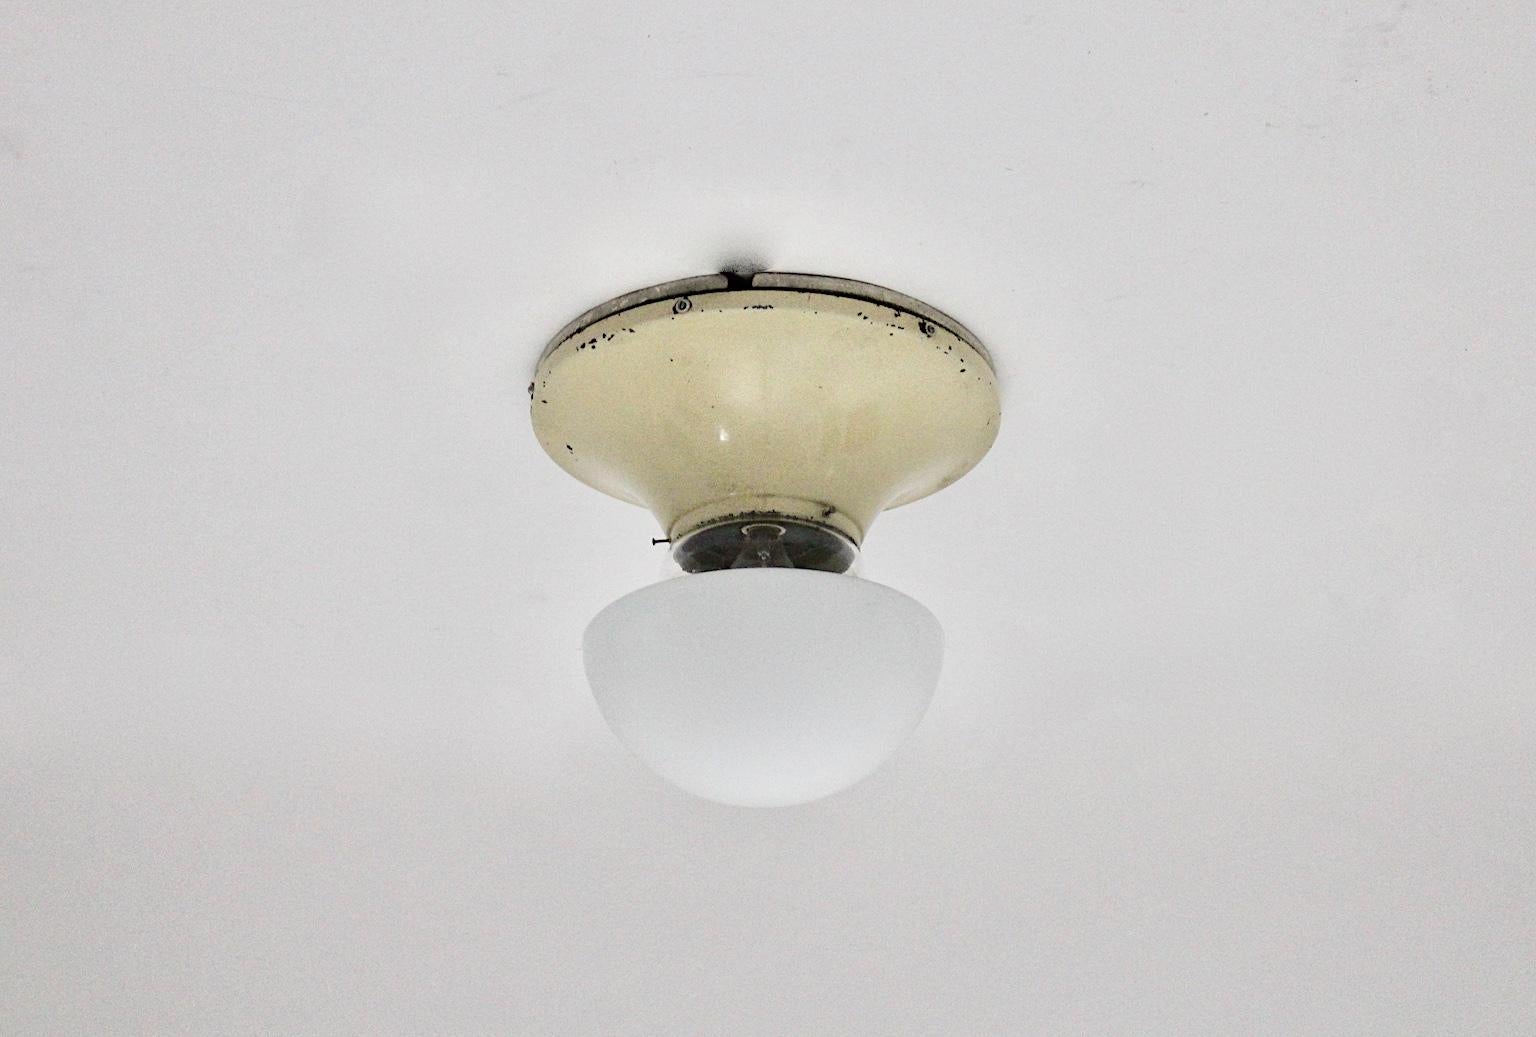 A Bauhaus era white glass metal vintage flush mount, which was designed and produced in the 1930s in Germany.
The flush mount comprises an opaline glass shade fixed on an original white painted metal base. It requires an E 27 light bulb and is in